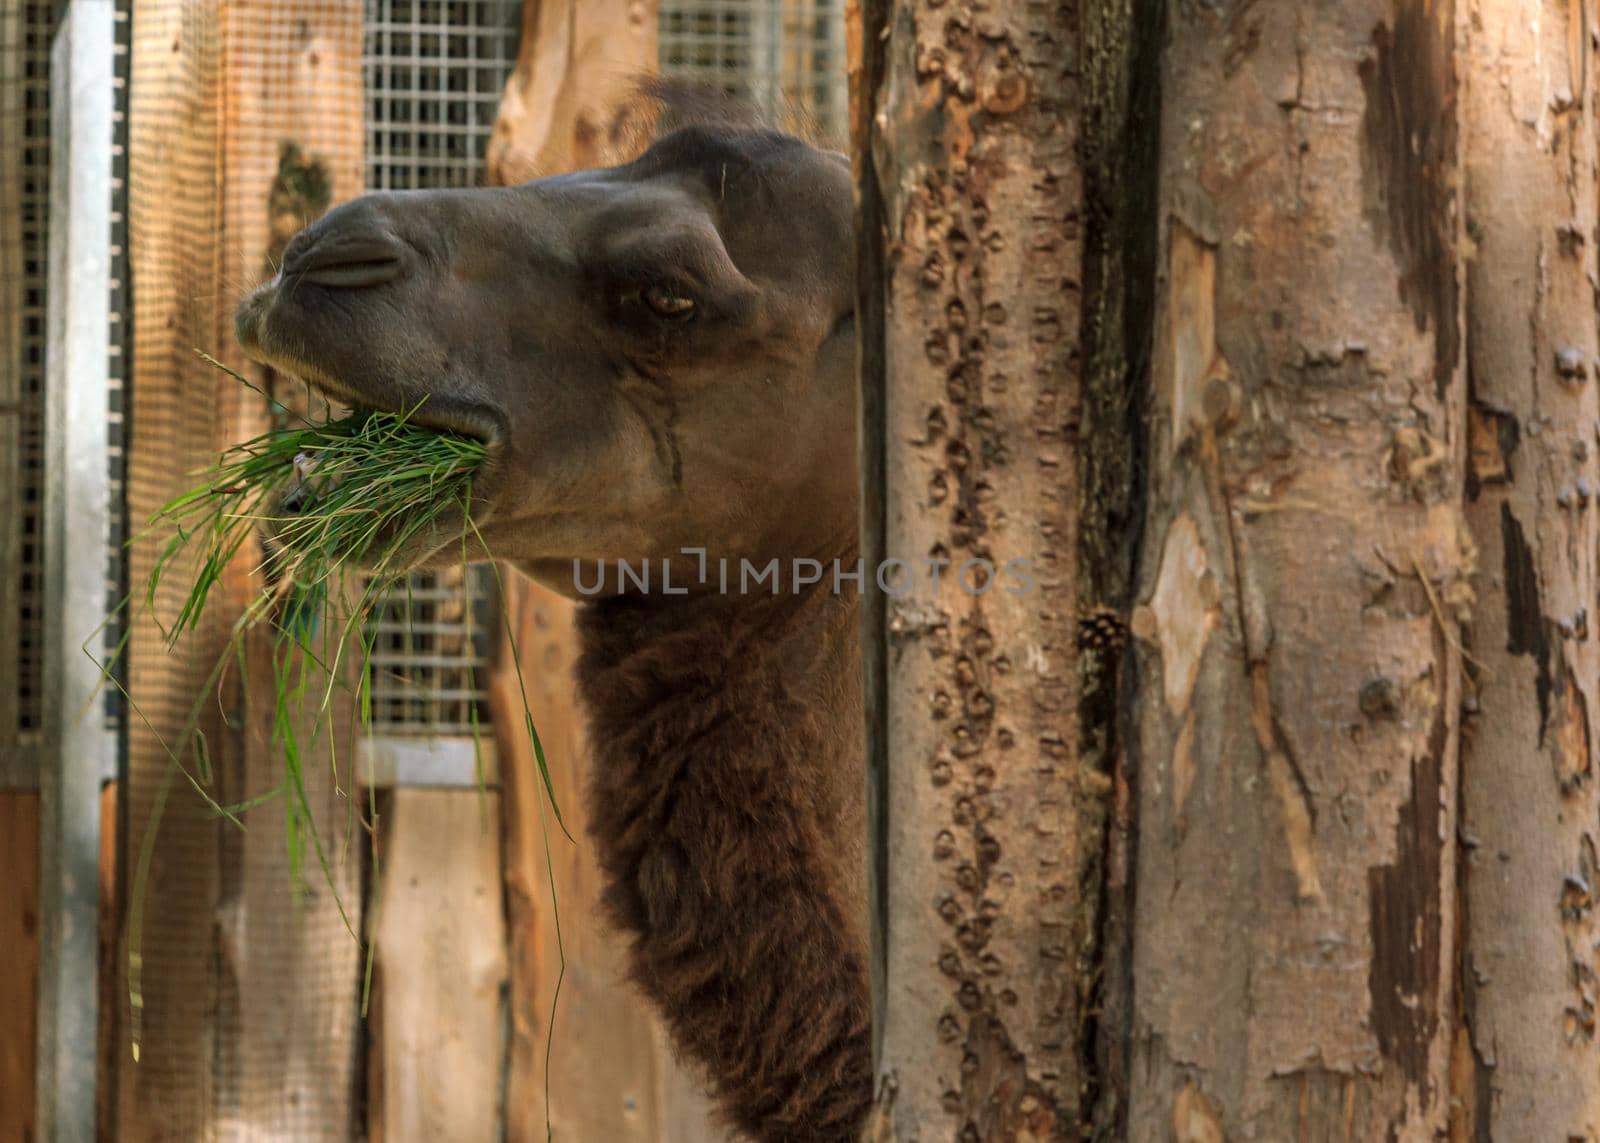 Zoo humpback camel eating grass by scudrinja